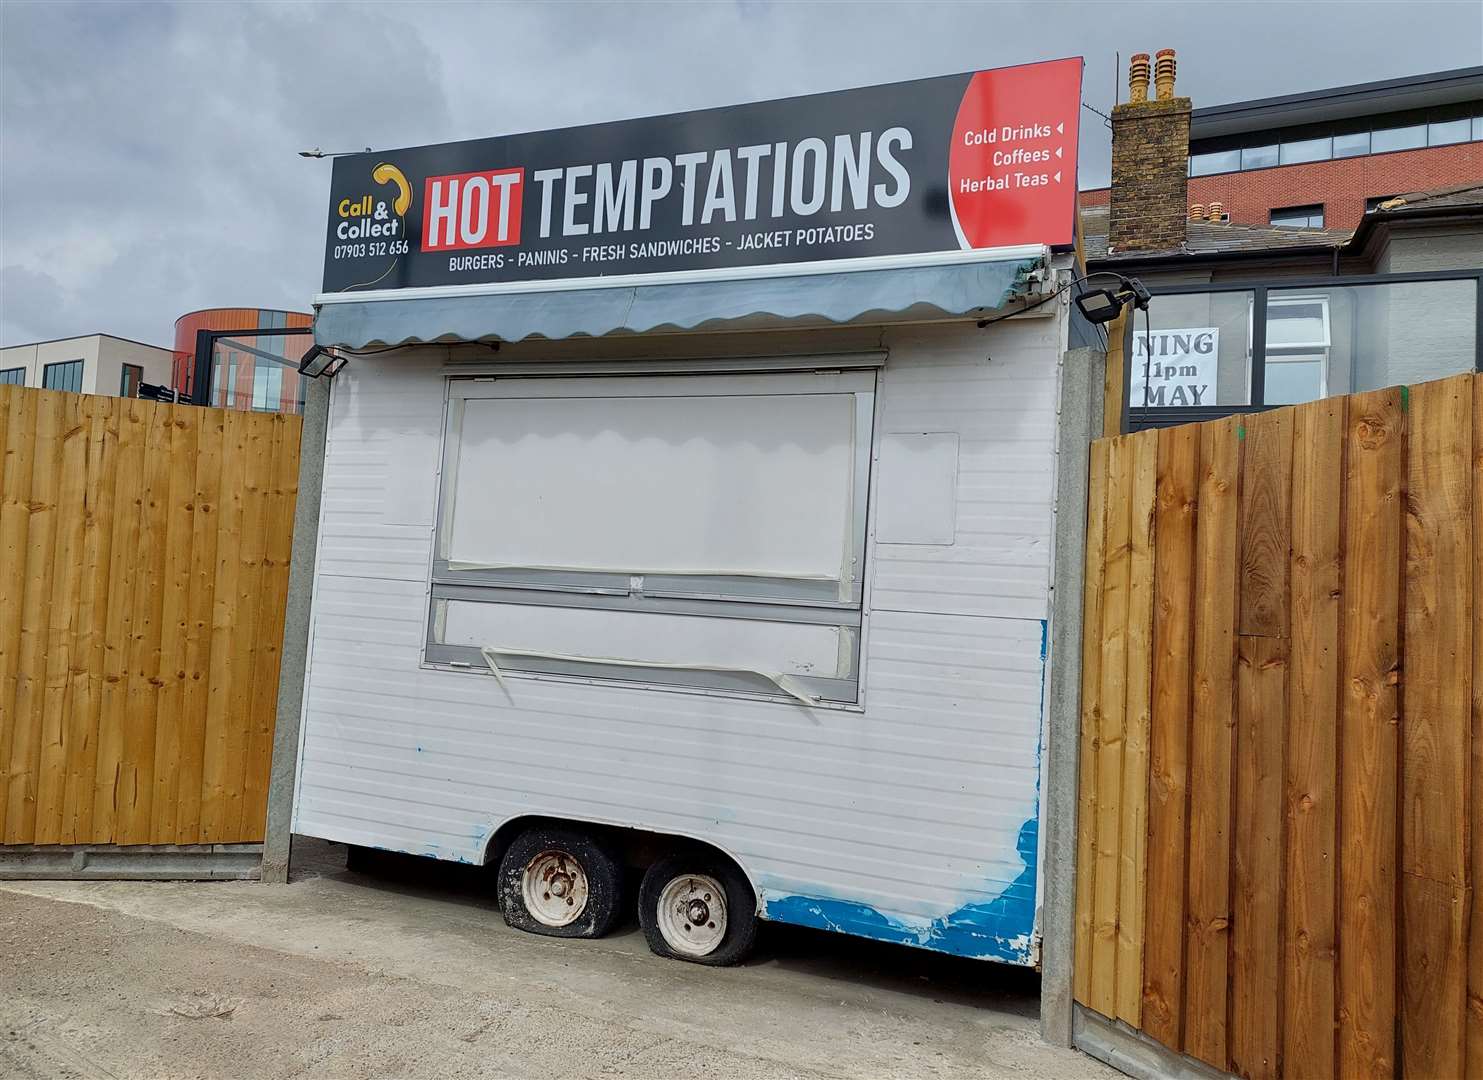 The short-lived kebab van will now serve burgers, jacket potatoes and other items